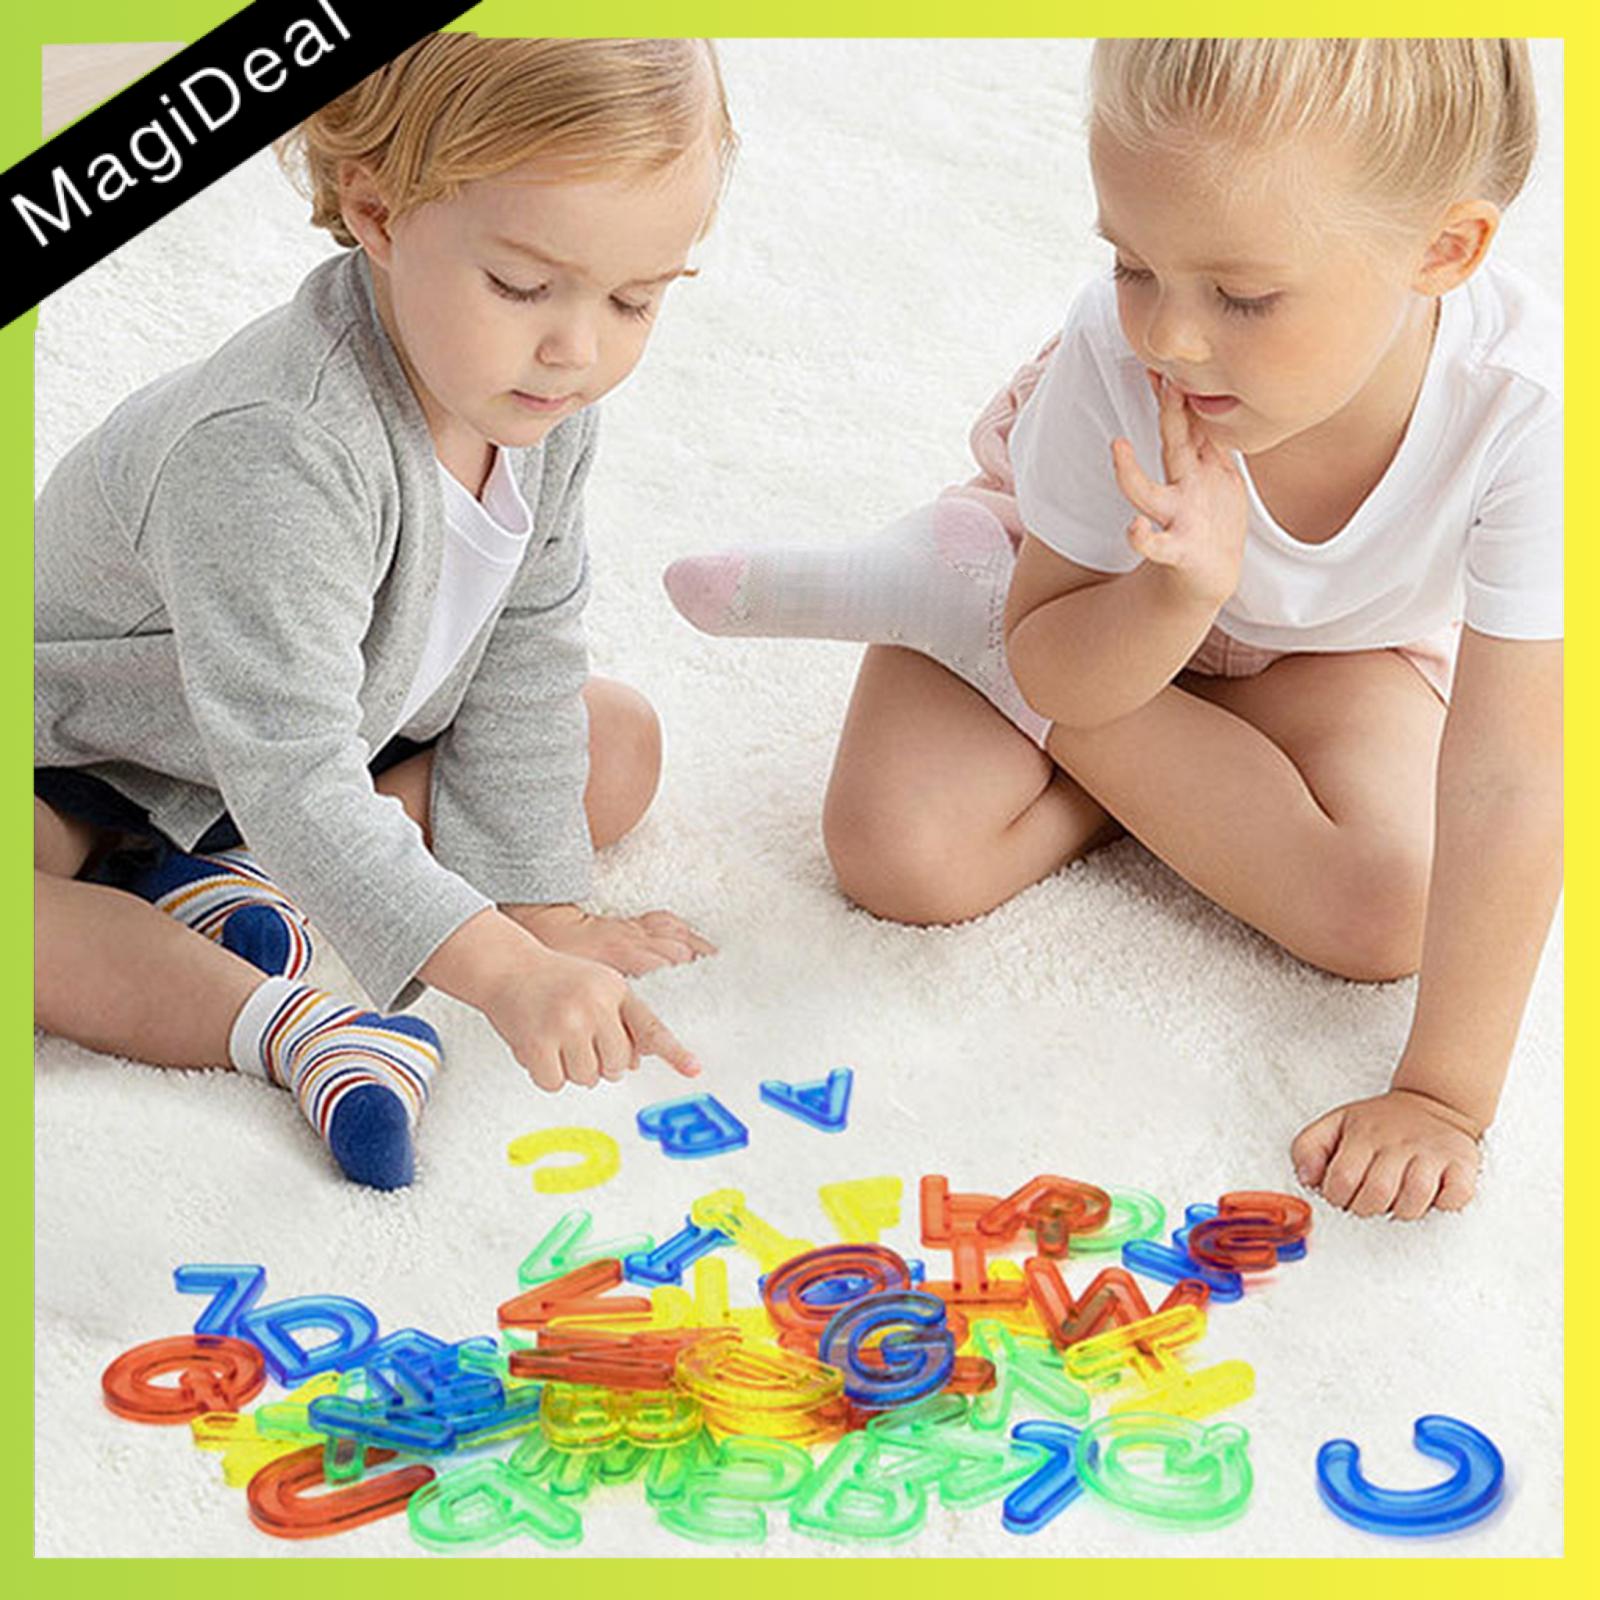 Magideal transparent letters and numbers learning vocabulary pattern - ảnh sản phẩm 1